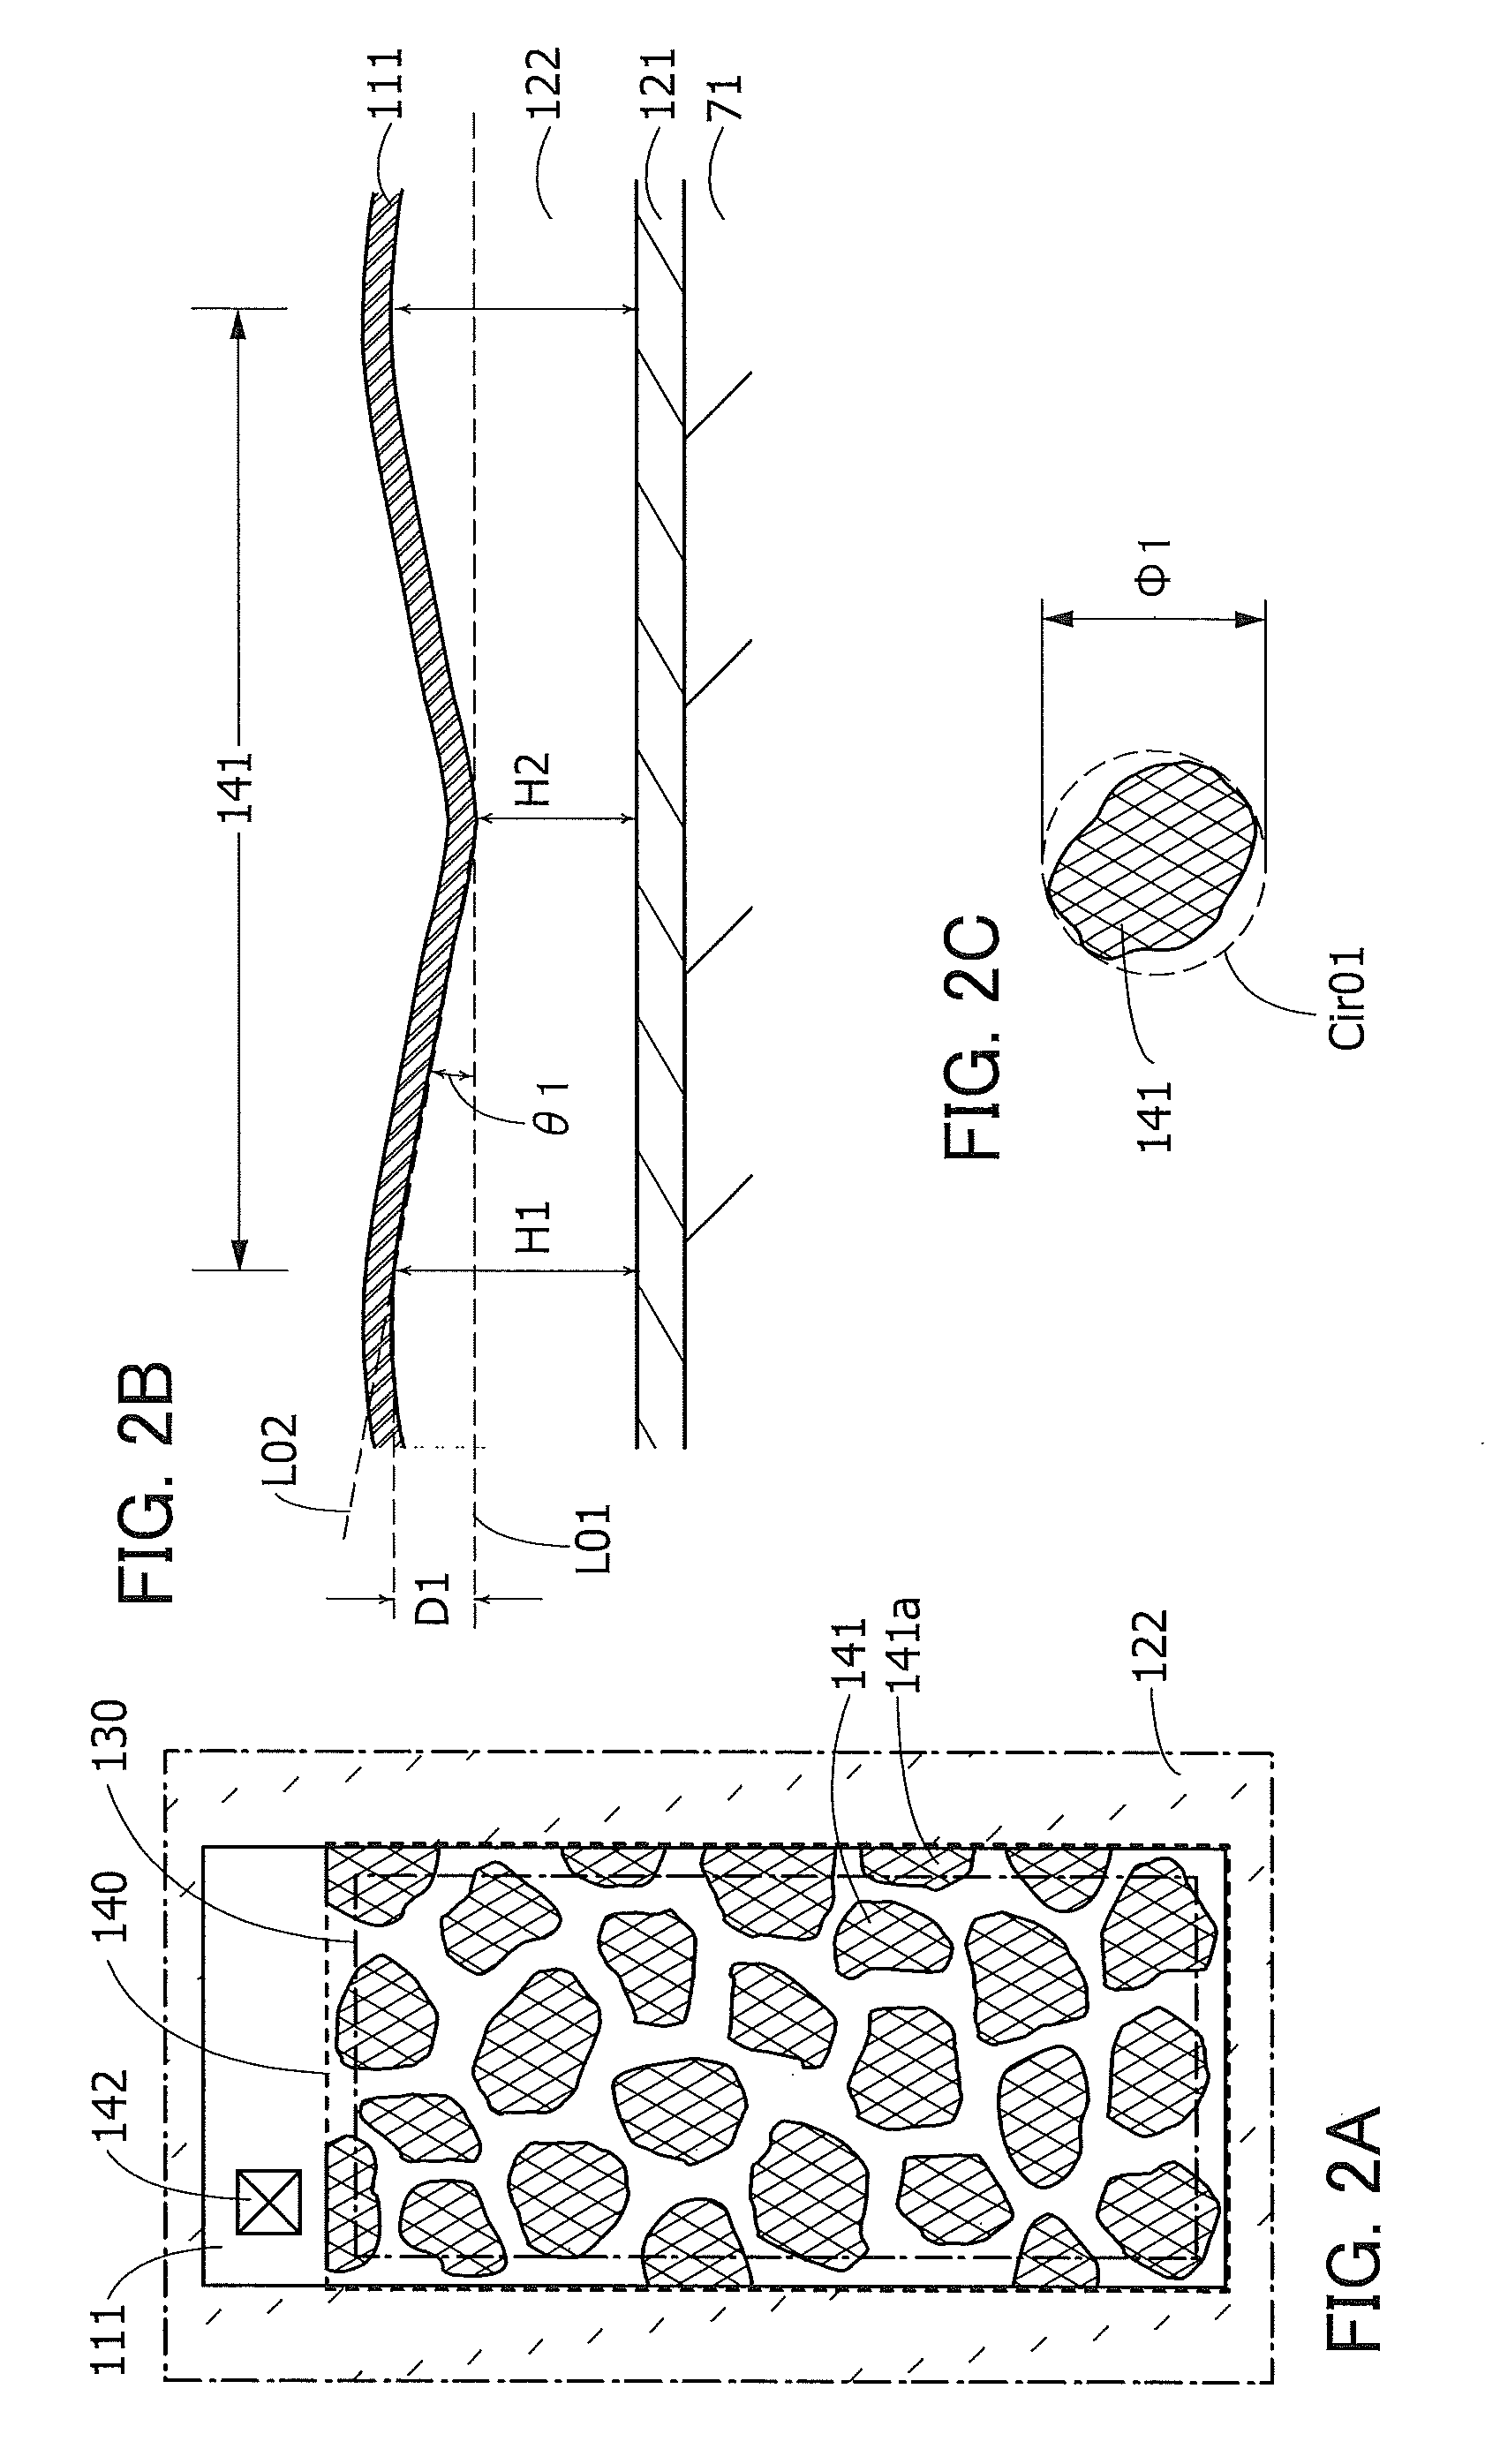 Light-emitting device having an electrode with depressions